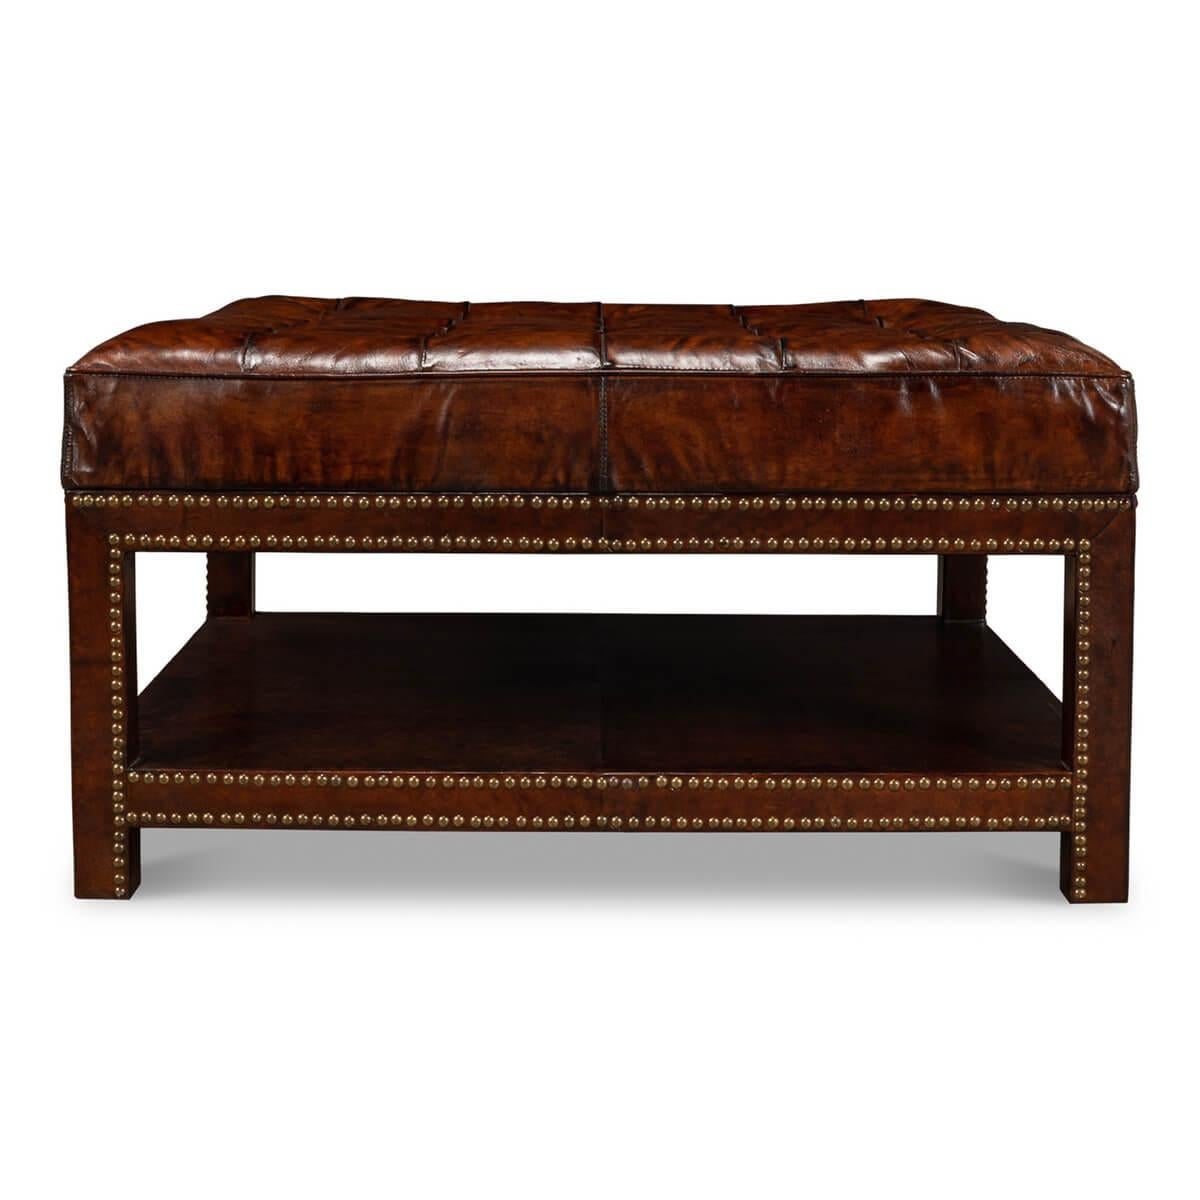 Asian Vintage-Style Tufted Leather Ottoman For Sale